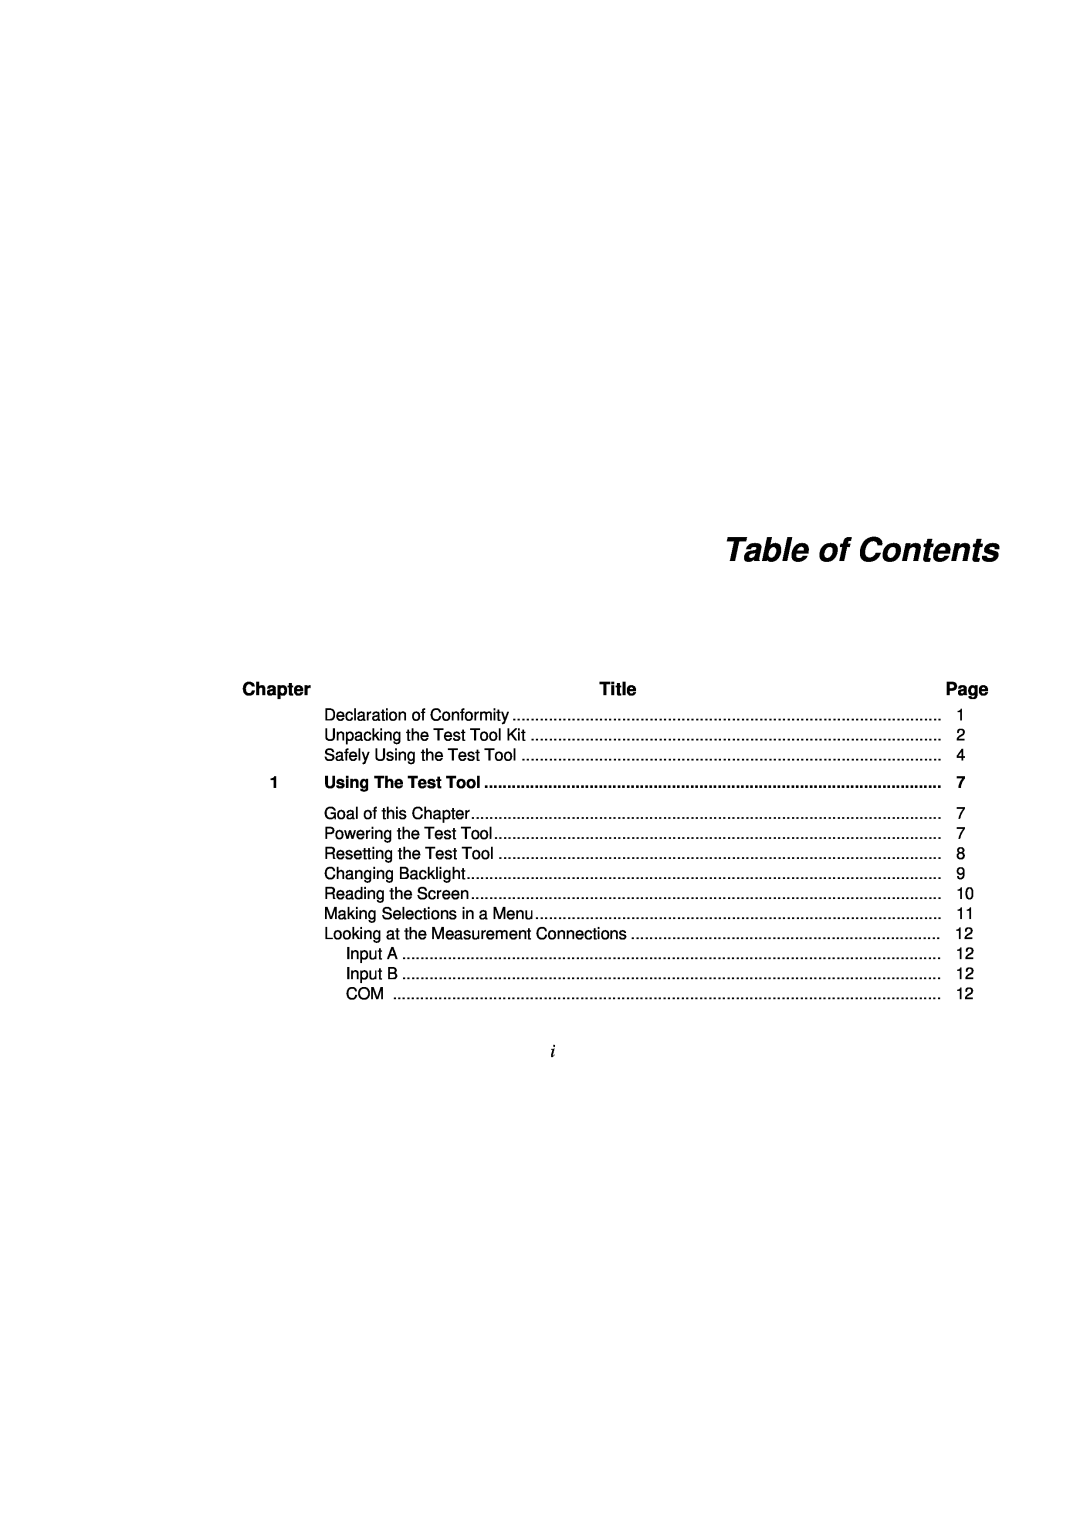 Fluke fluke123 user manual Table of Contents, Page, Using The Test Tool, Chapter, Title 